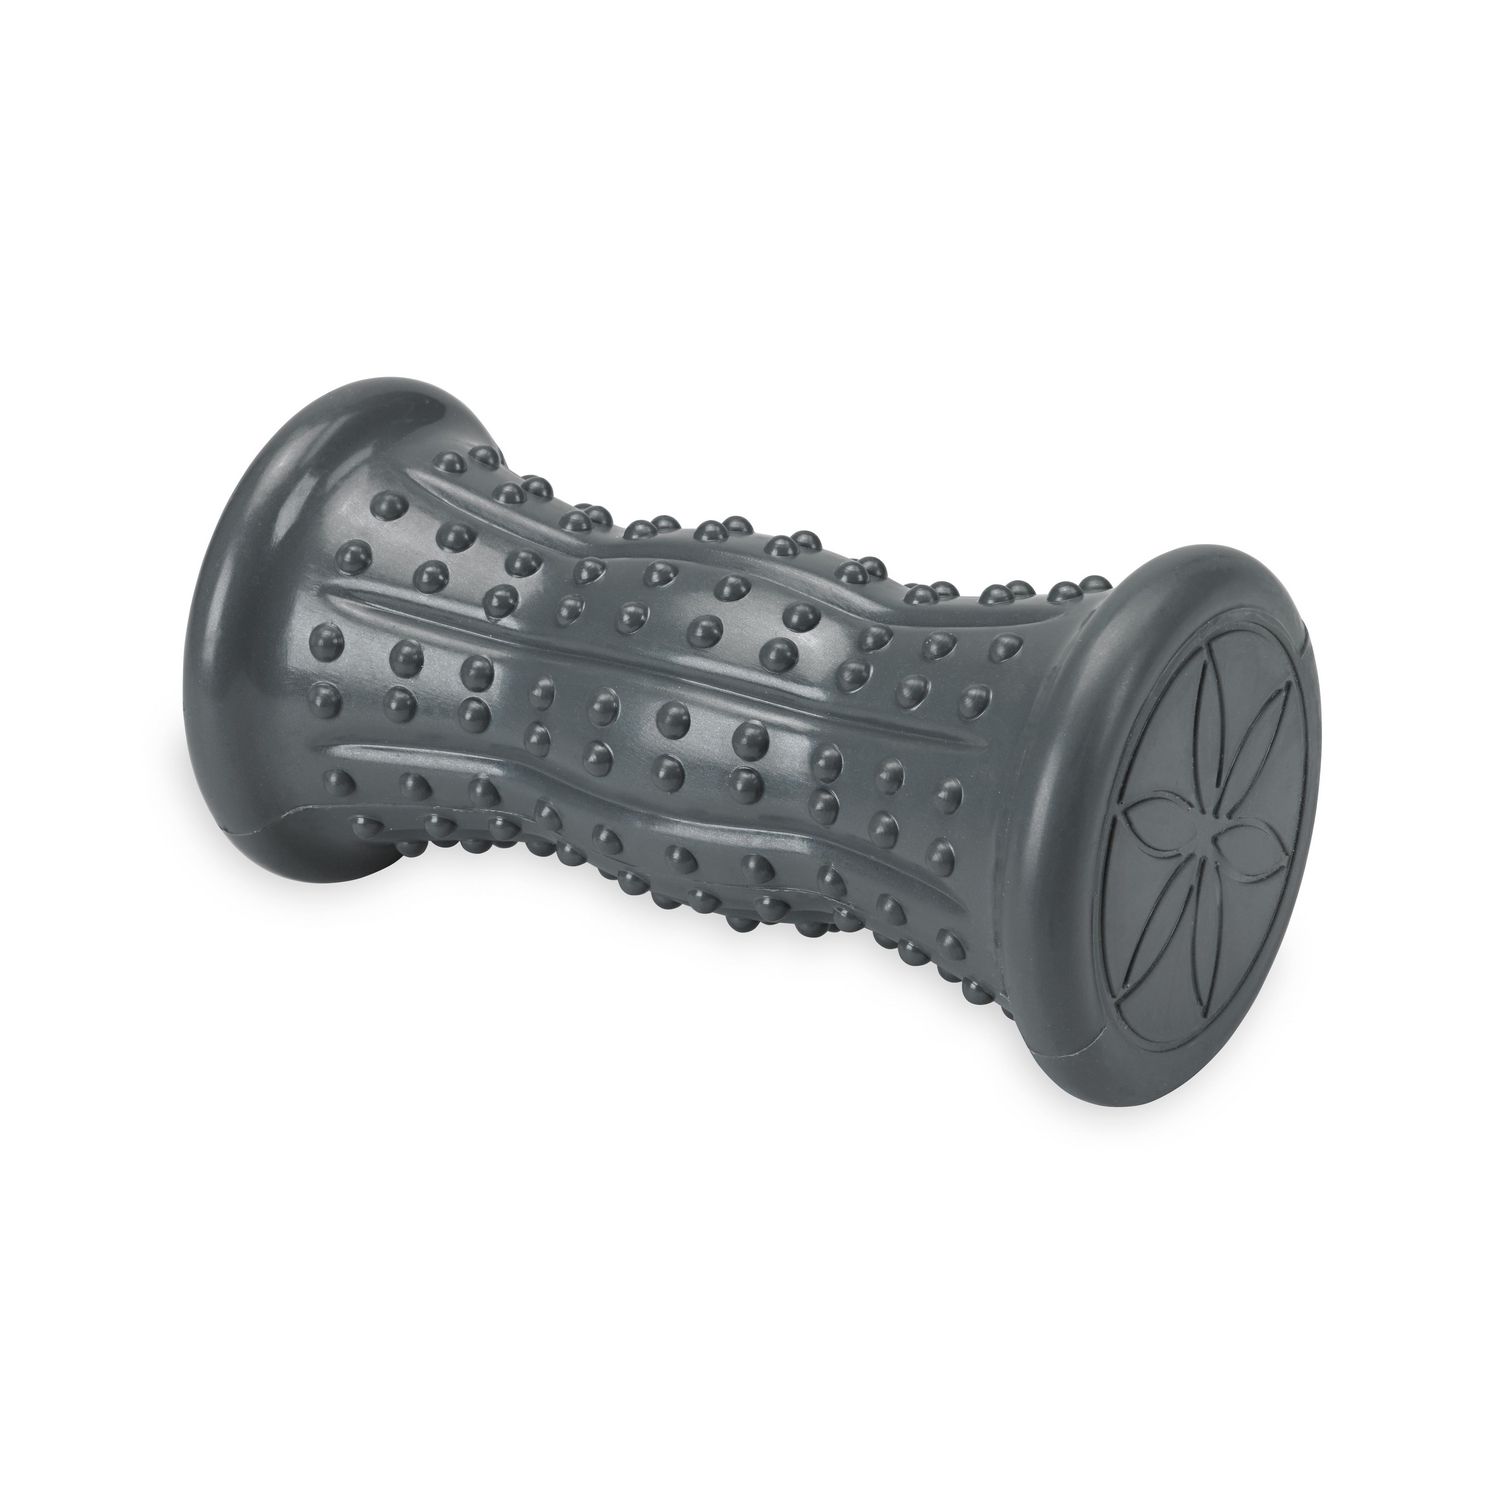 Gaiam Restore Hot & Cold Foot Roller, Massage, Recovery, Muscle